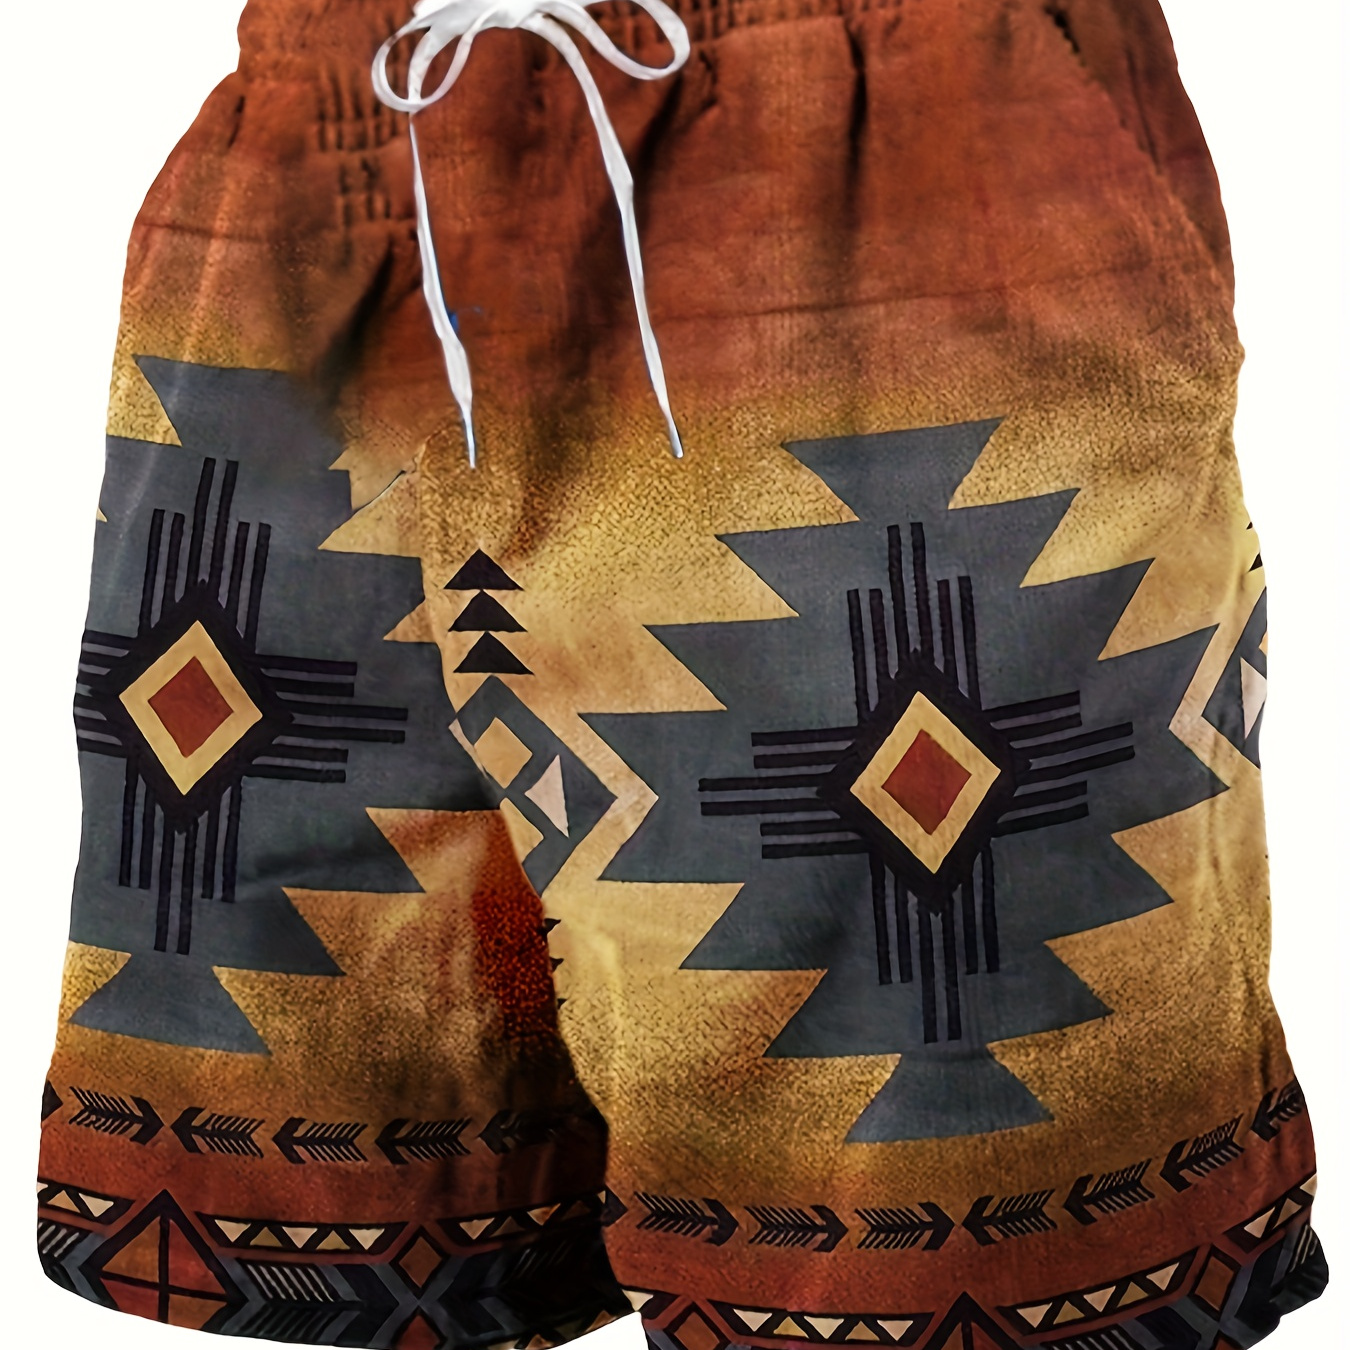 

Men's Ethnic Style Graphic Pattern Shorts With Drawstring And Pockets, Chic And Trendy Shorts Suitable For Summer Leisurewear And Beach Wear